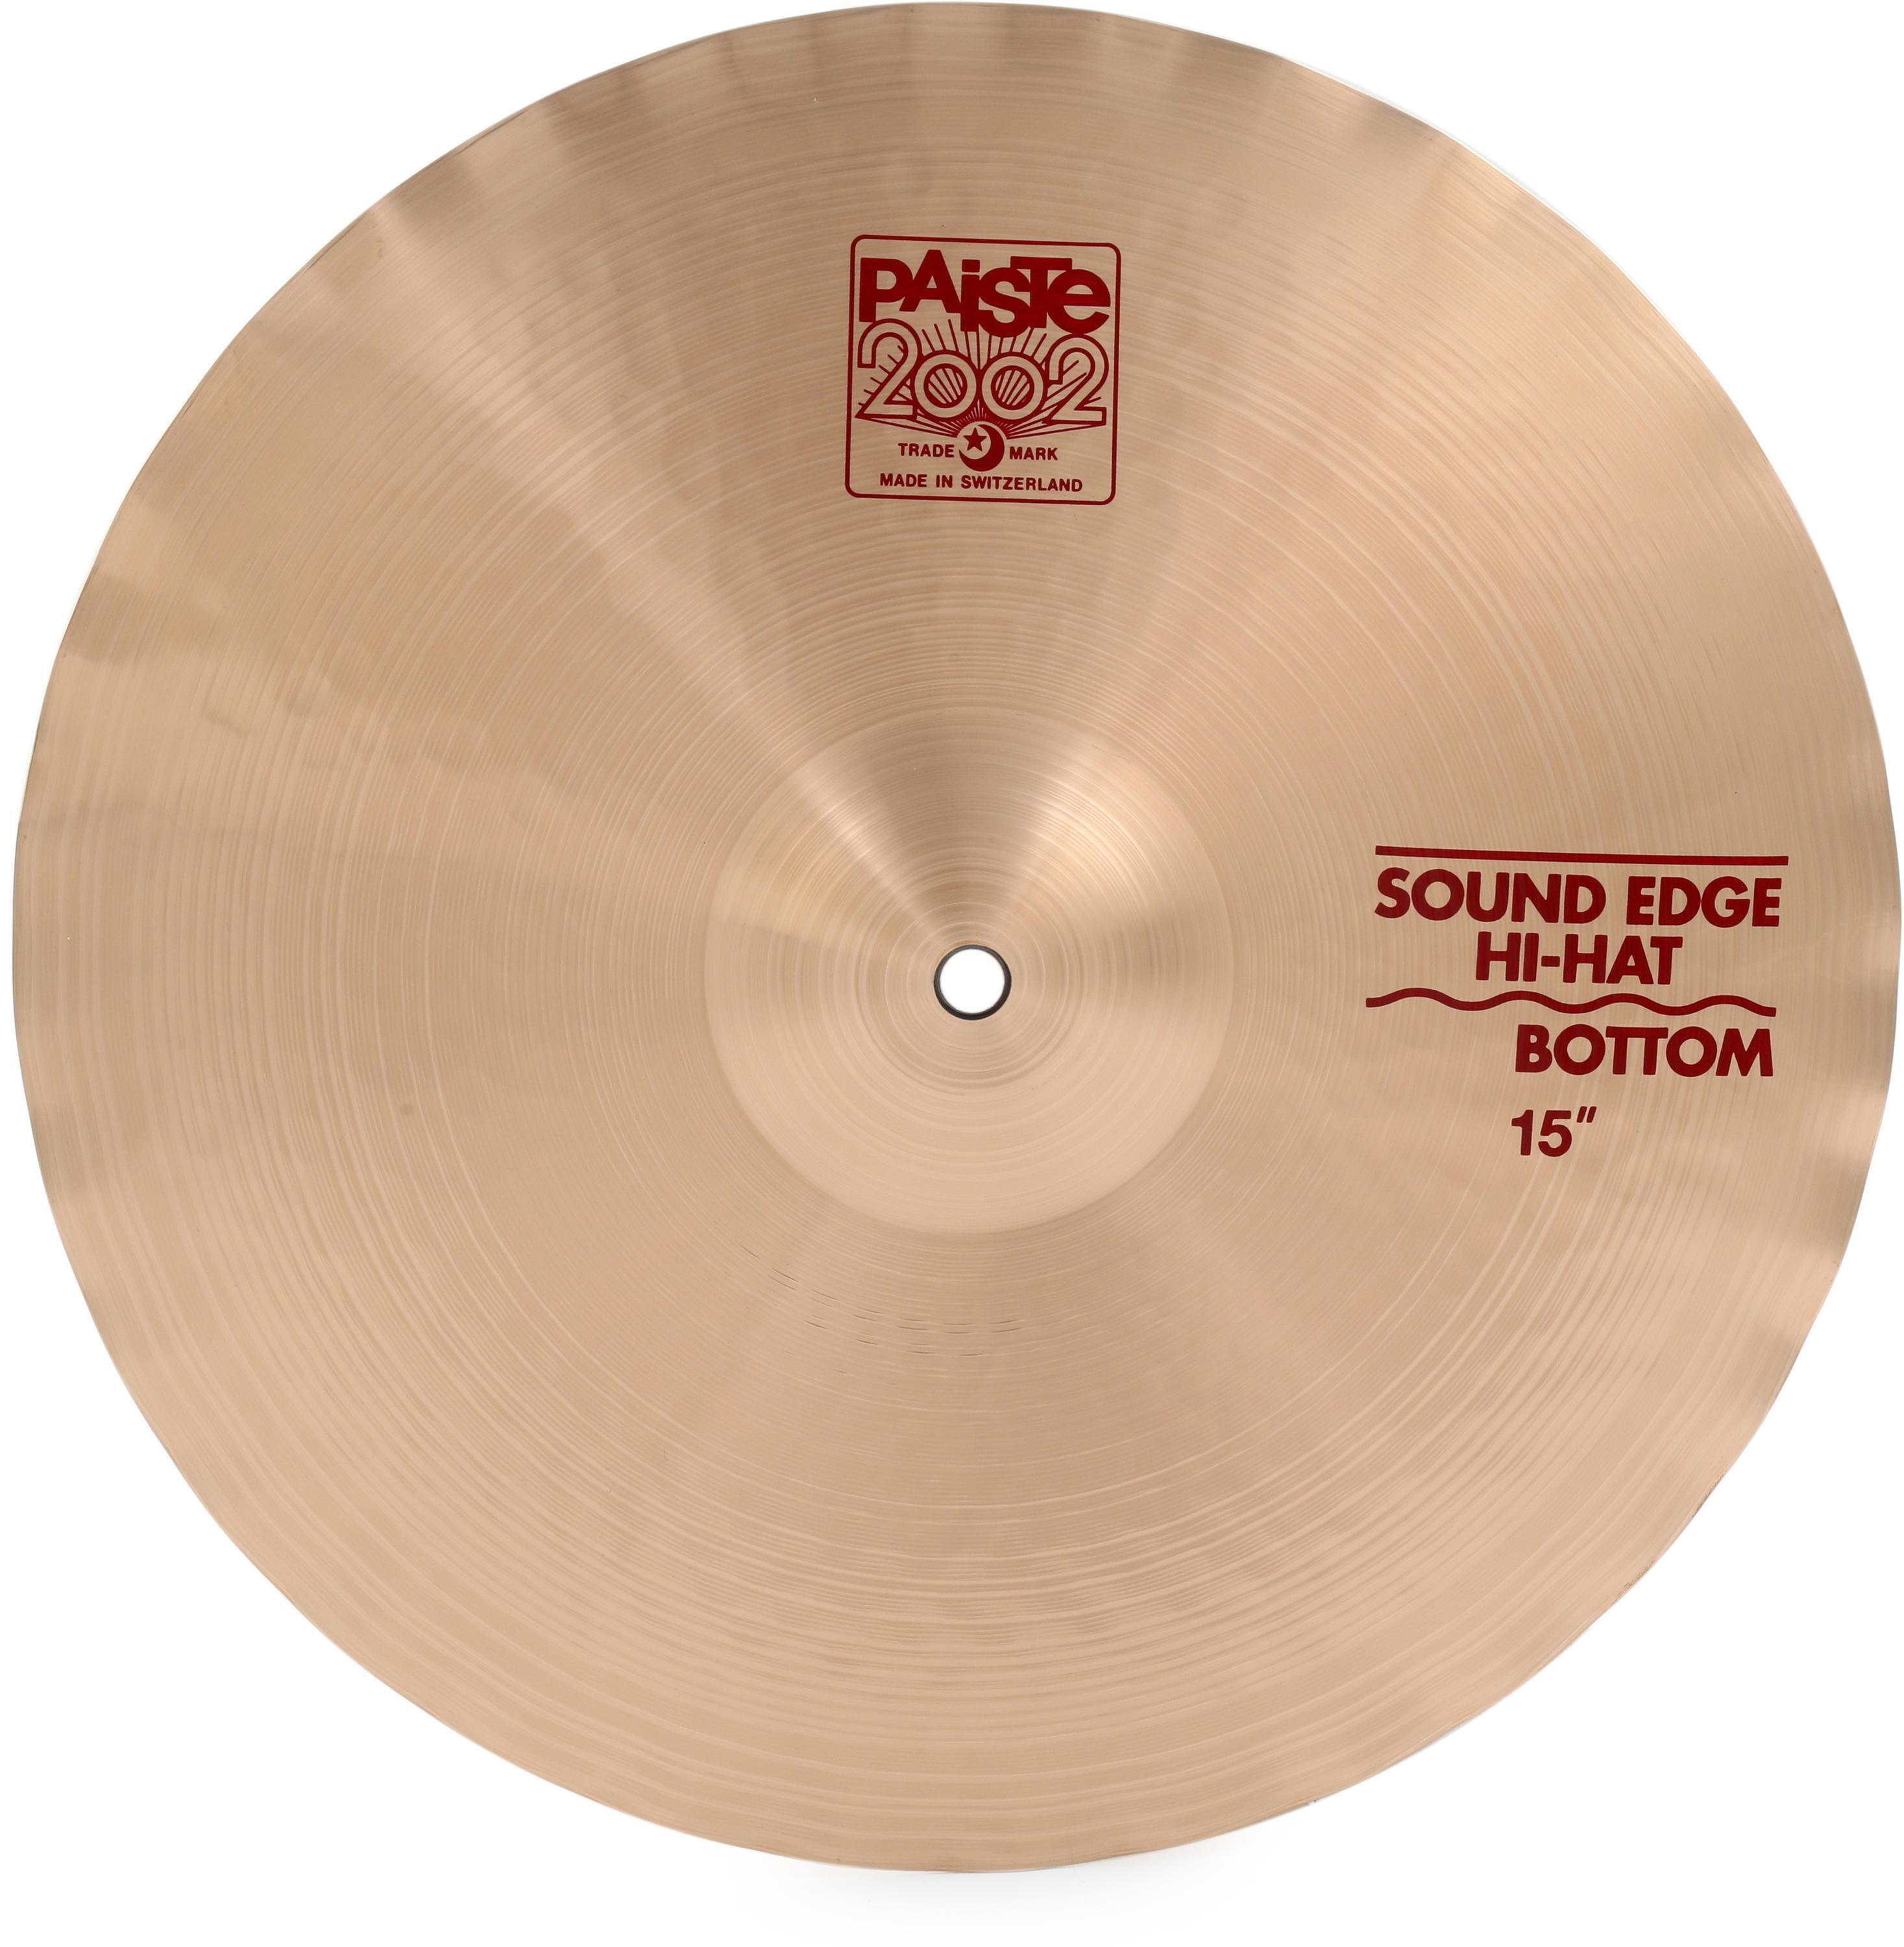 Paiste 15 inch 2002 Sound Edge Hi-hat Top Cymbal | Sweetwater